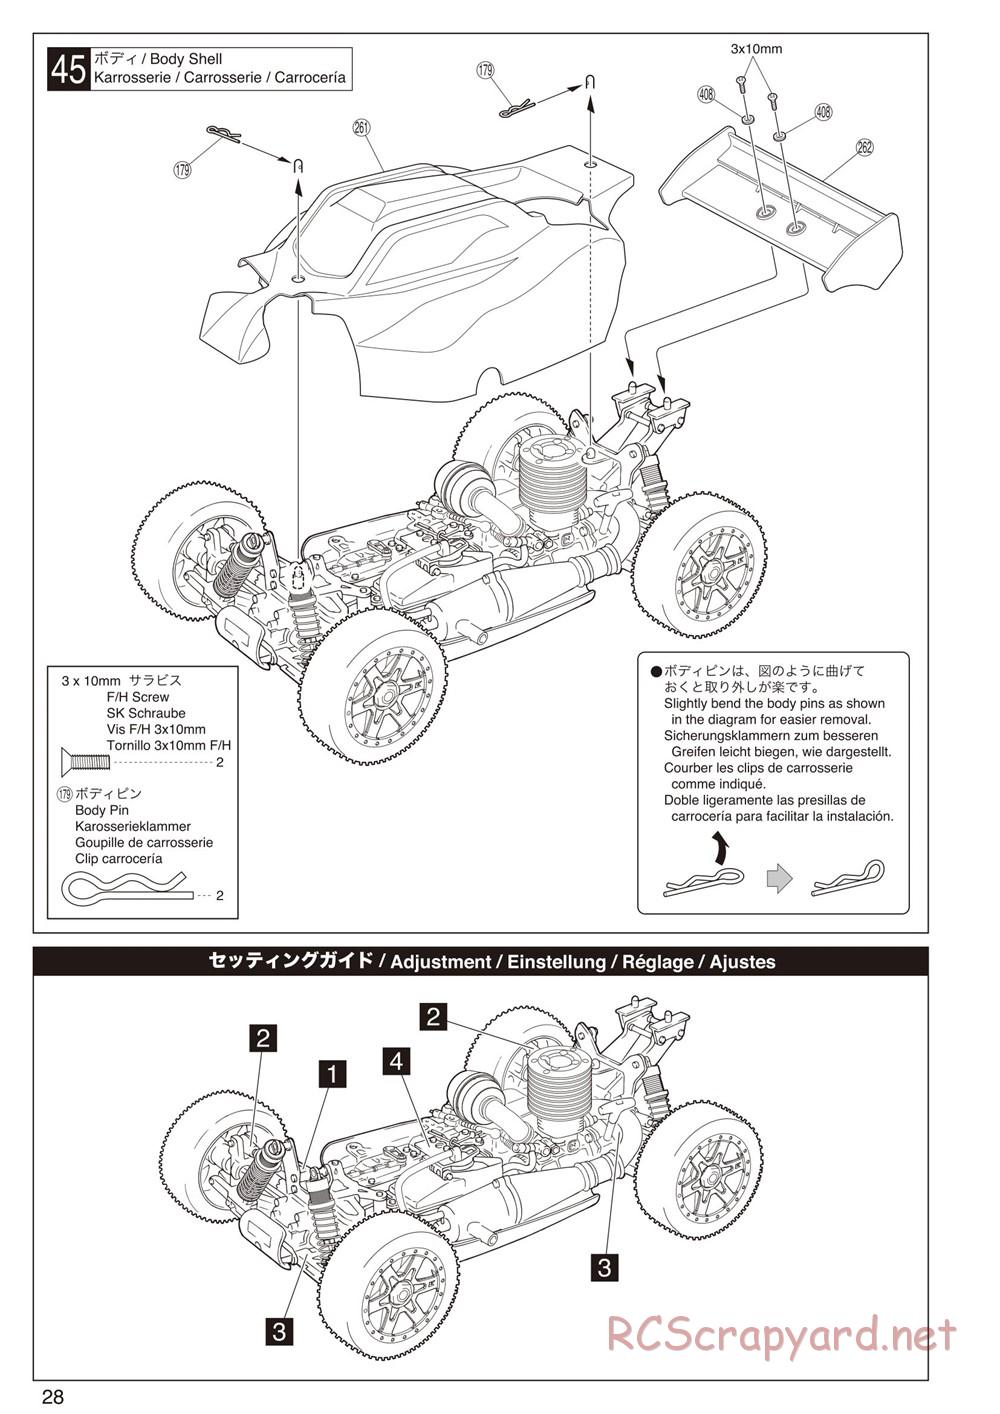 Kyosho - Inferno Neo 2.0 - Manual - Page 28